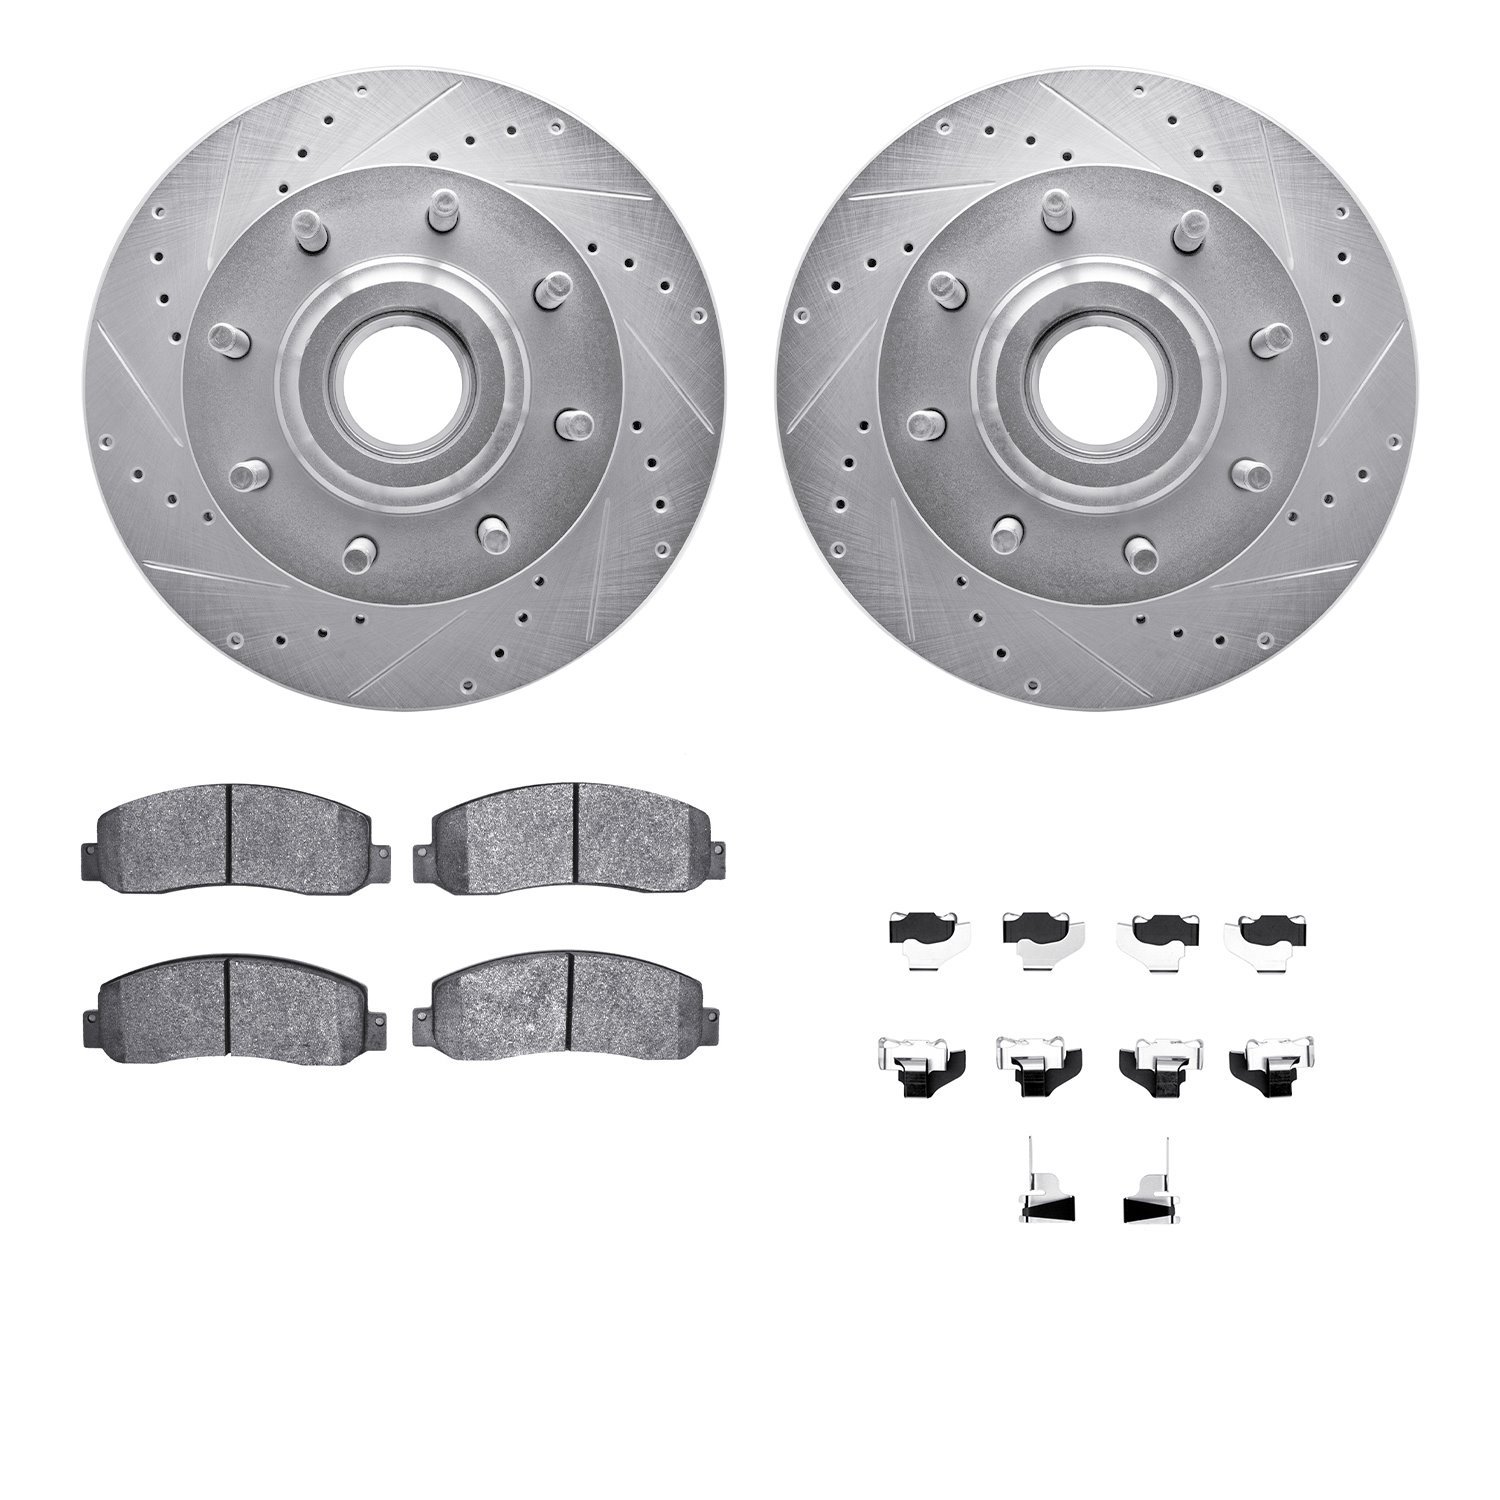 7412-54091 Drilled/Slotted Brake Rotors with Ultimate-Duty Brake Pads Kit & Hardware [Silver], 2006-2012 Ford/Lincoln/Mercury/Ma